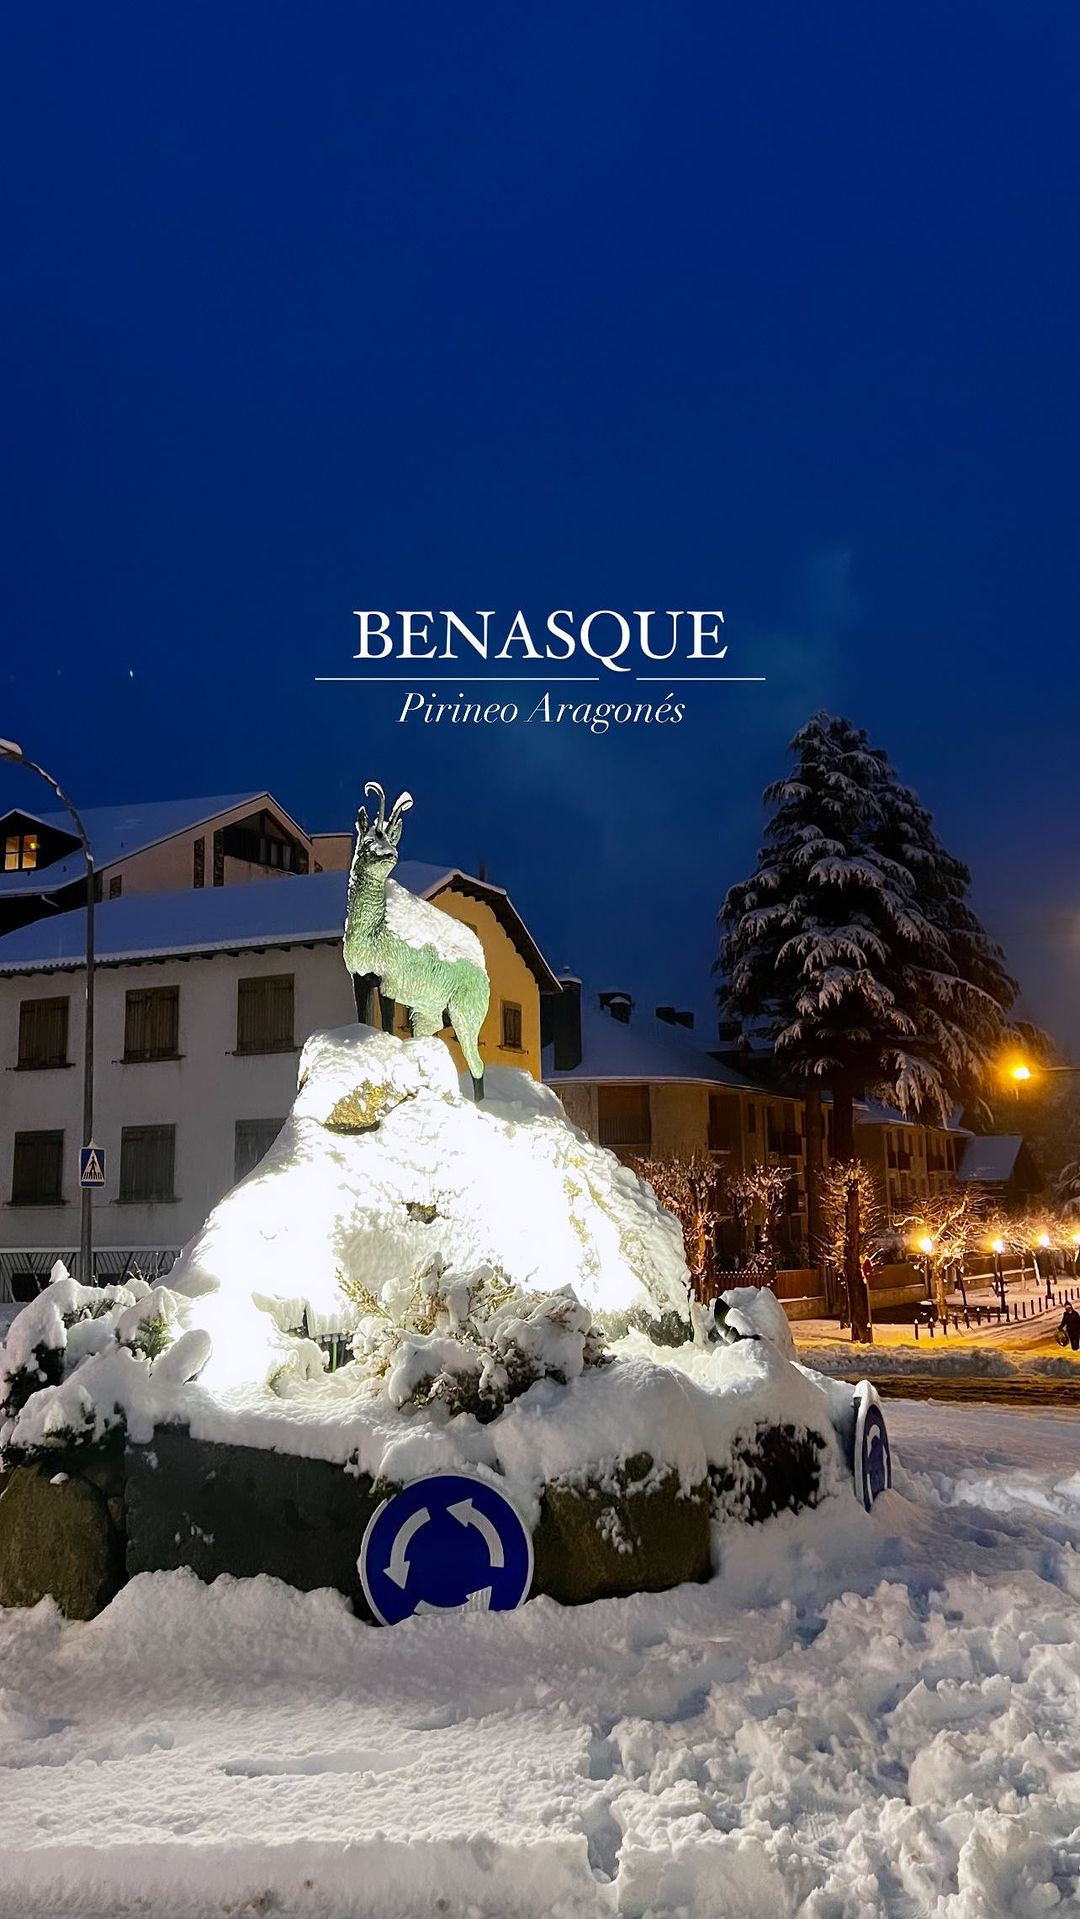 Culinary Delights in Benasque and Beyond